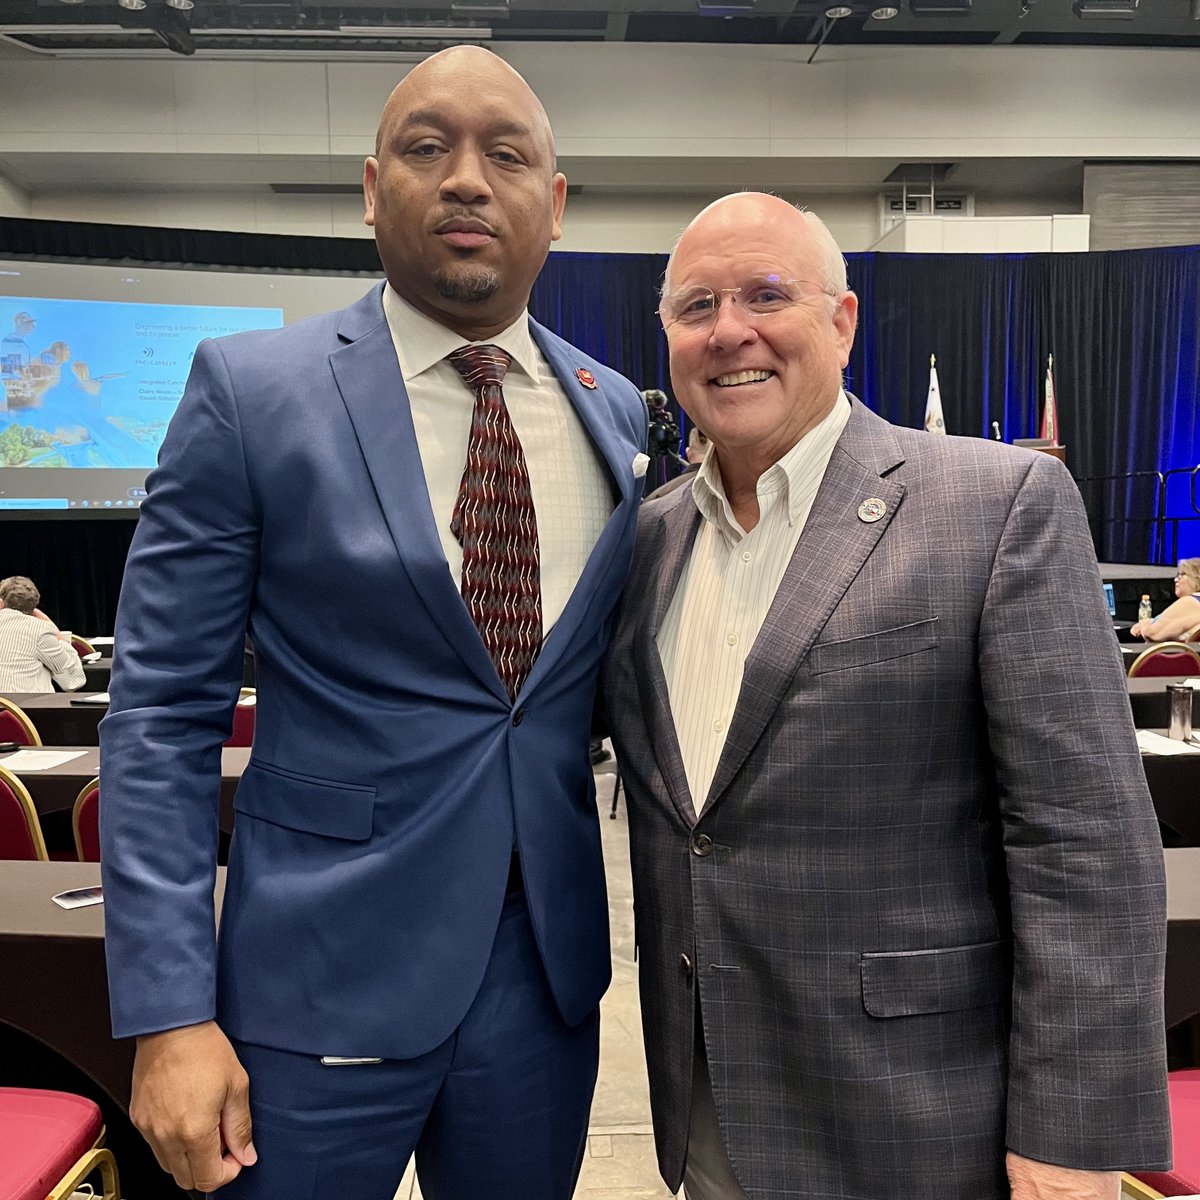 It was a great day with the @USACEGALVESTON discussing Flood Risk Management for our area. Byron Williams, the Deputy District Engineer, set a good start to the conference as we work to make sure homes and businesses stay dry in Harris Co. #Crime #Infrastructure #Floodmitigation